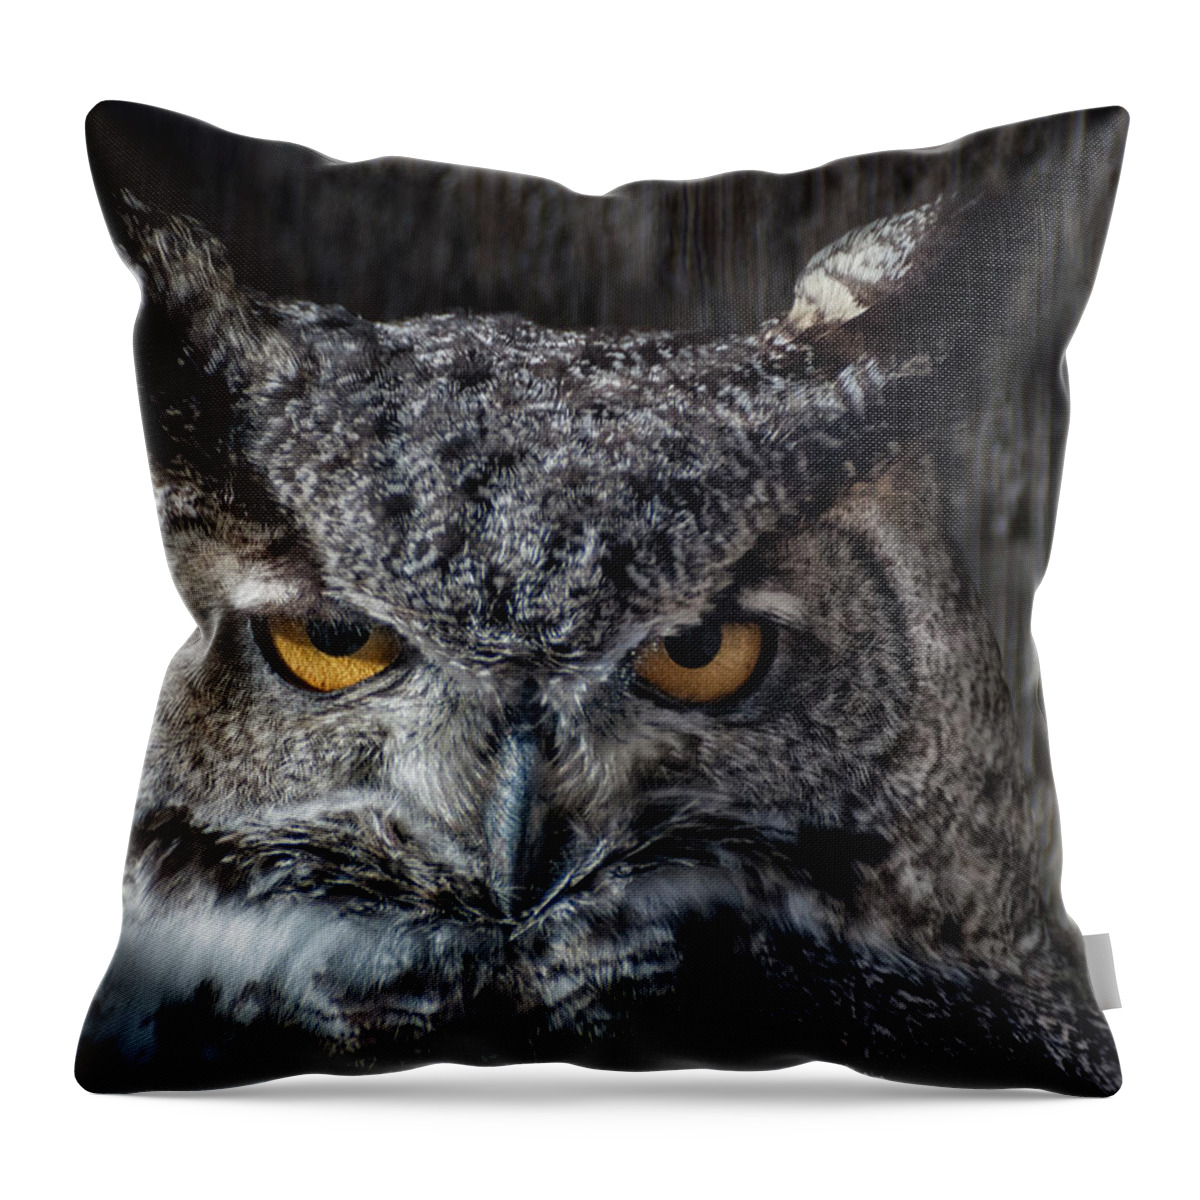 Animal Ark Throw Pillow featuring the photograph Great Horned Owl by Rick Mosher